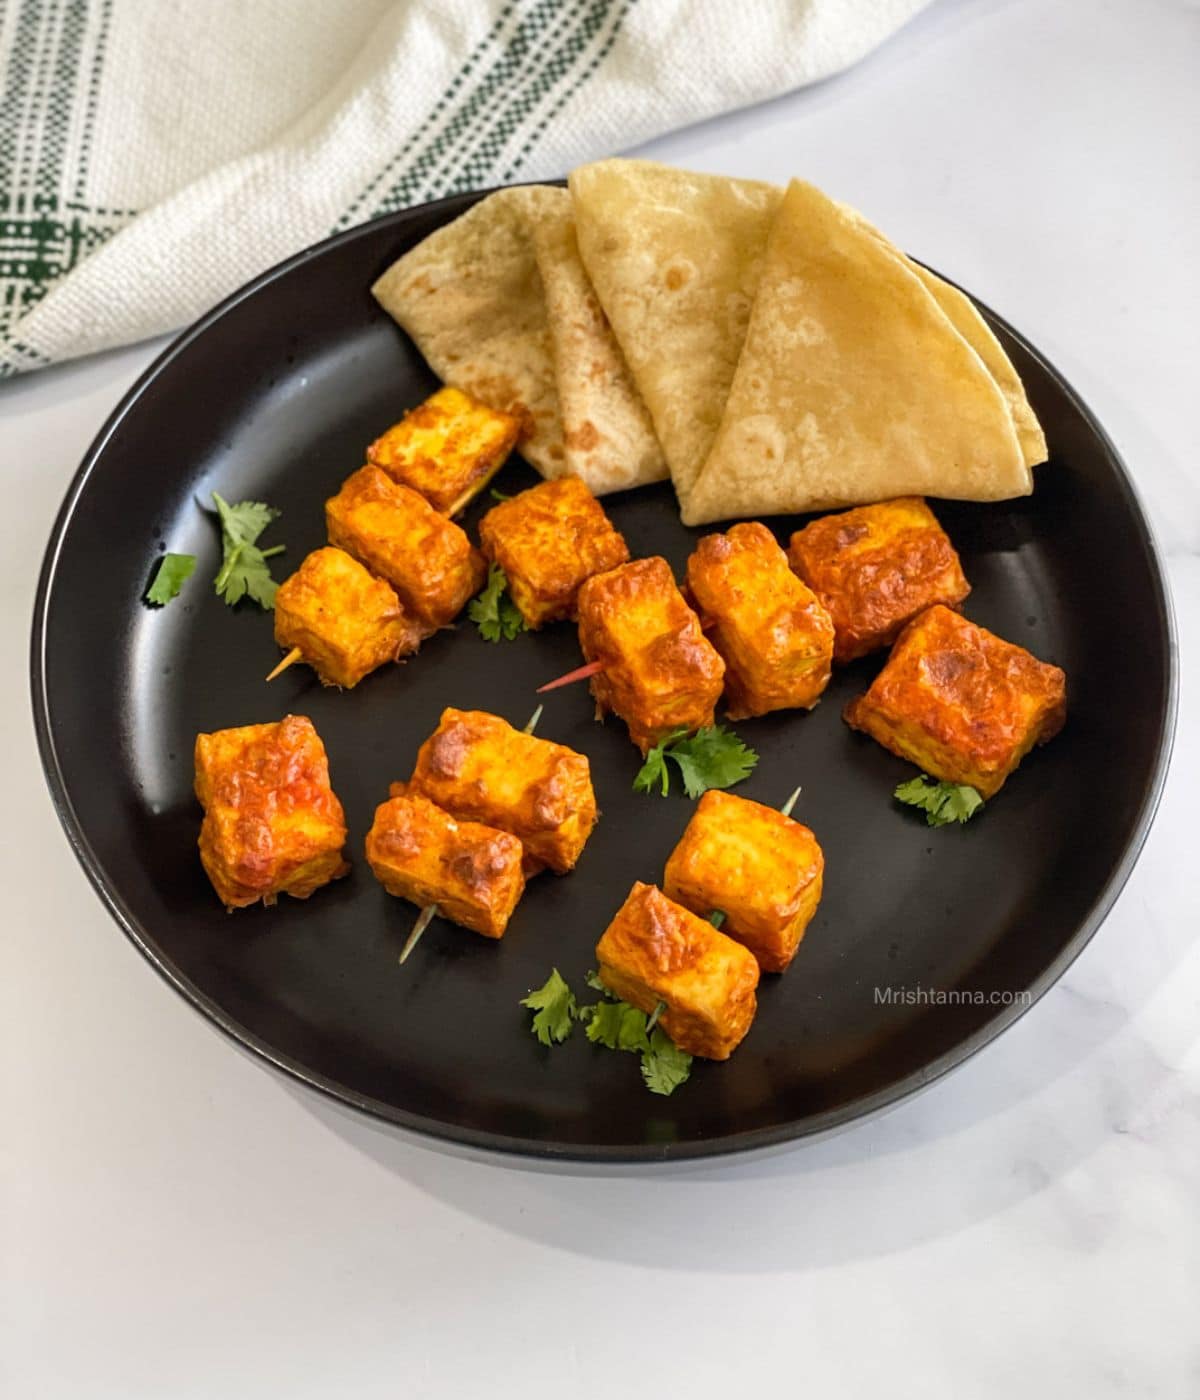 A plate of vegan tandoori tofu is on the table with chapati's.